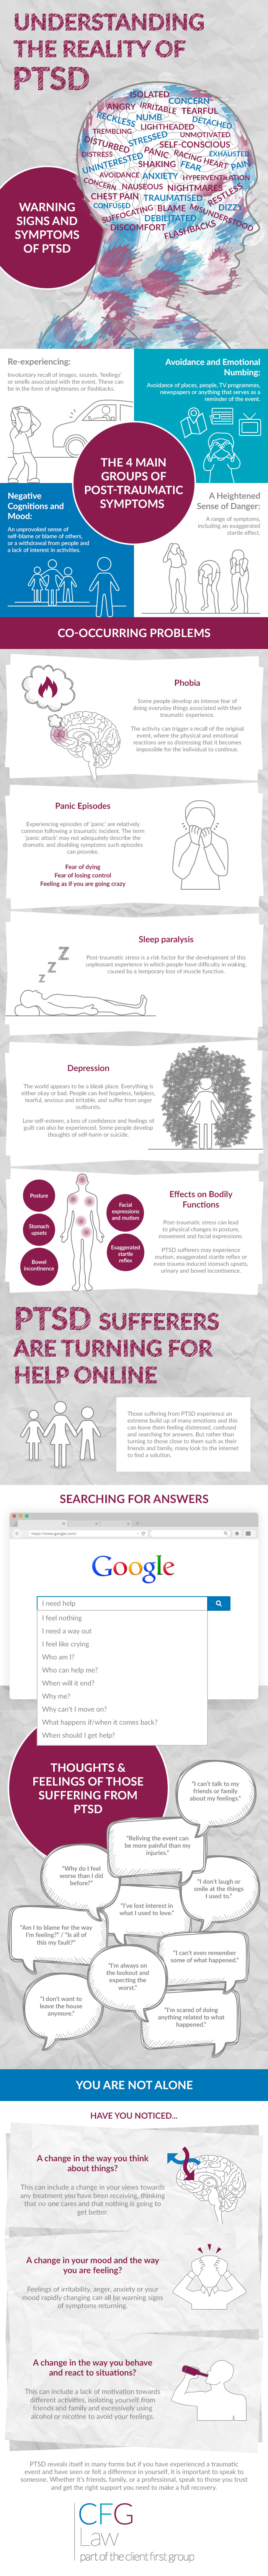 Understanding the Reality of Post-Traumatic Stress Disorder (PTSD)